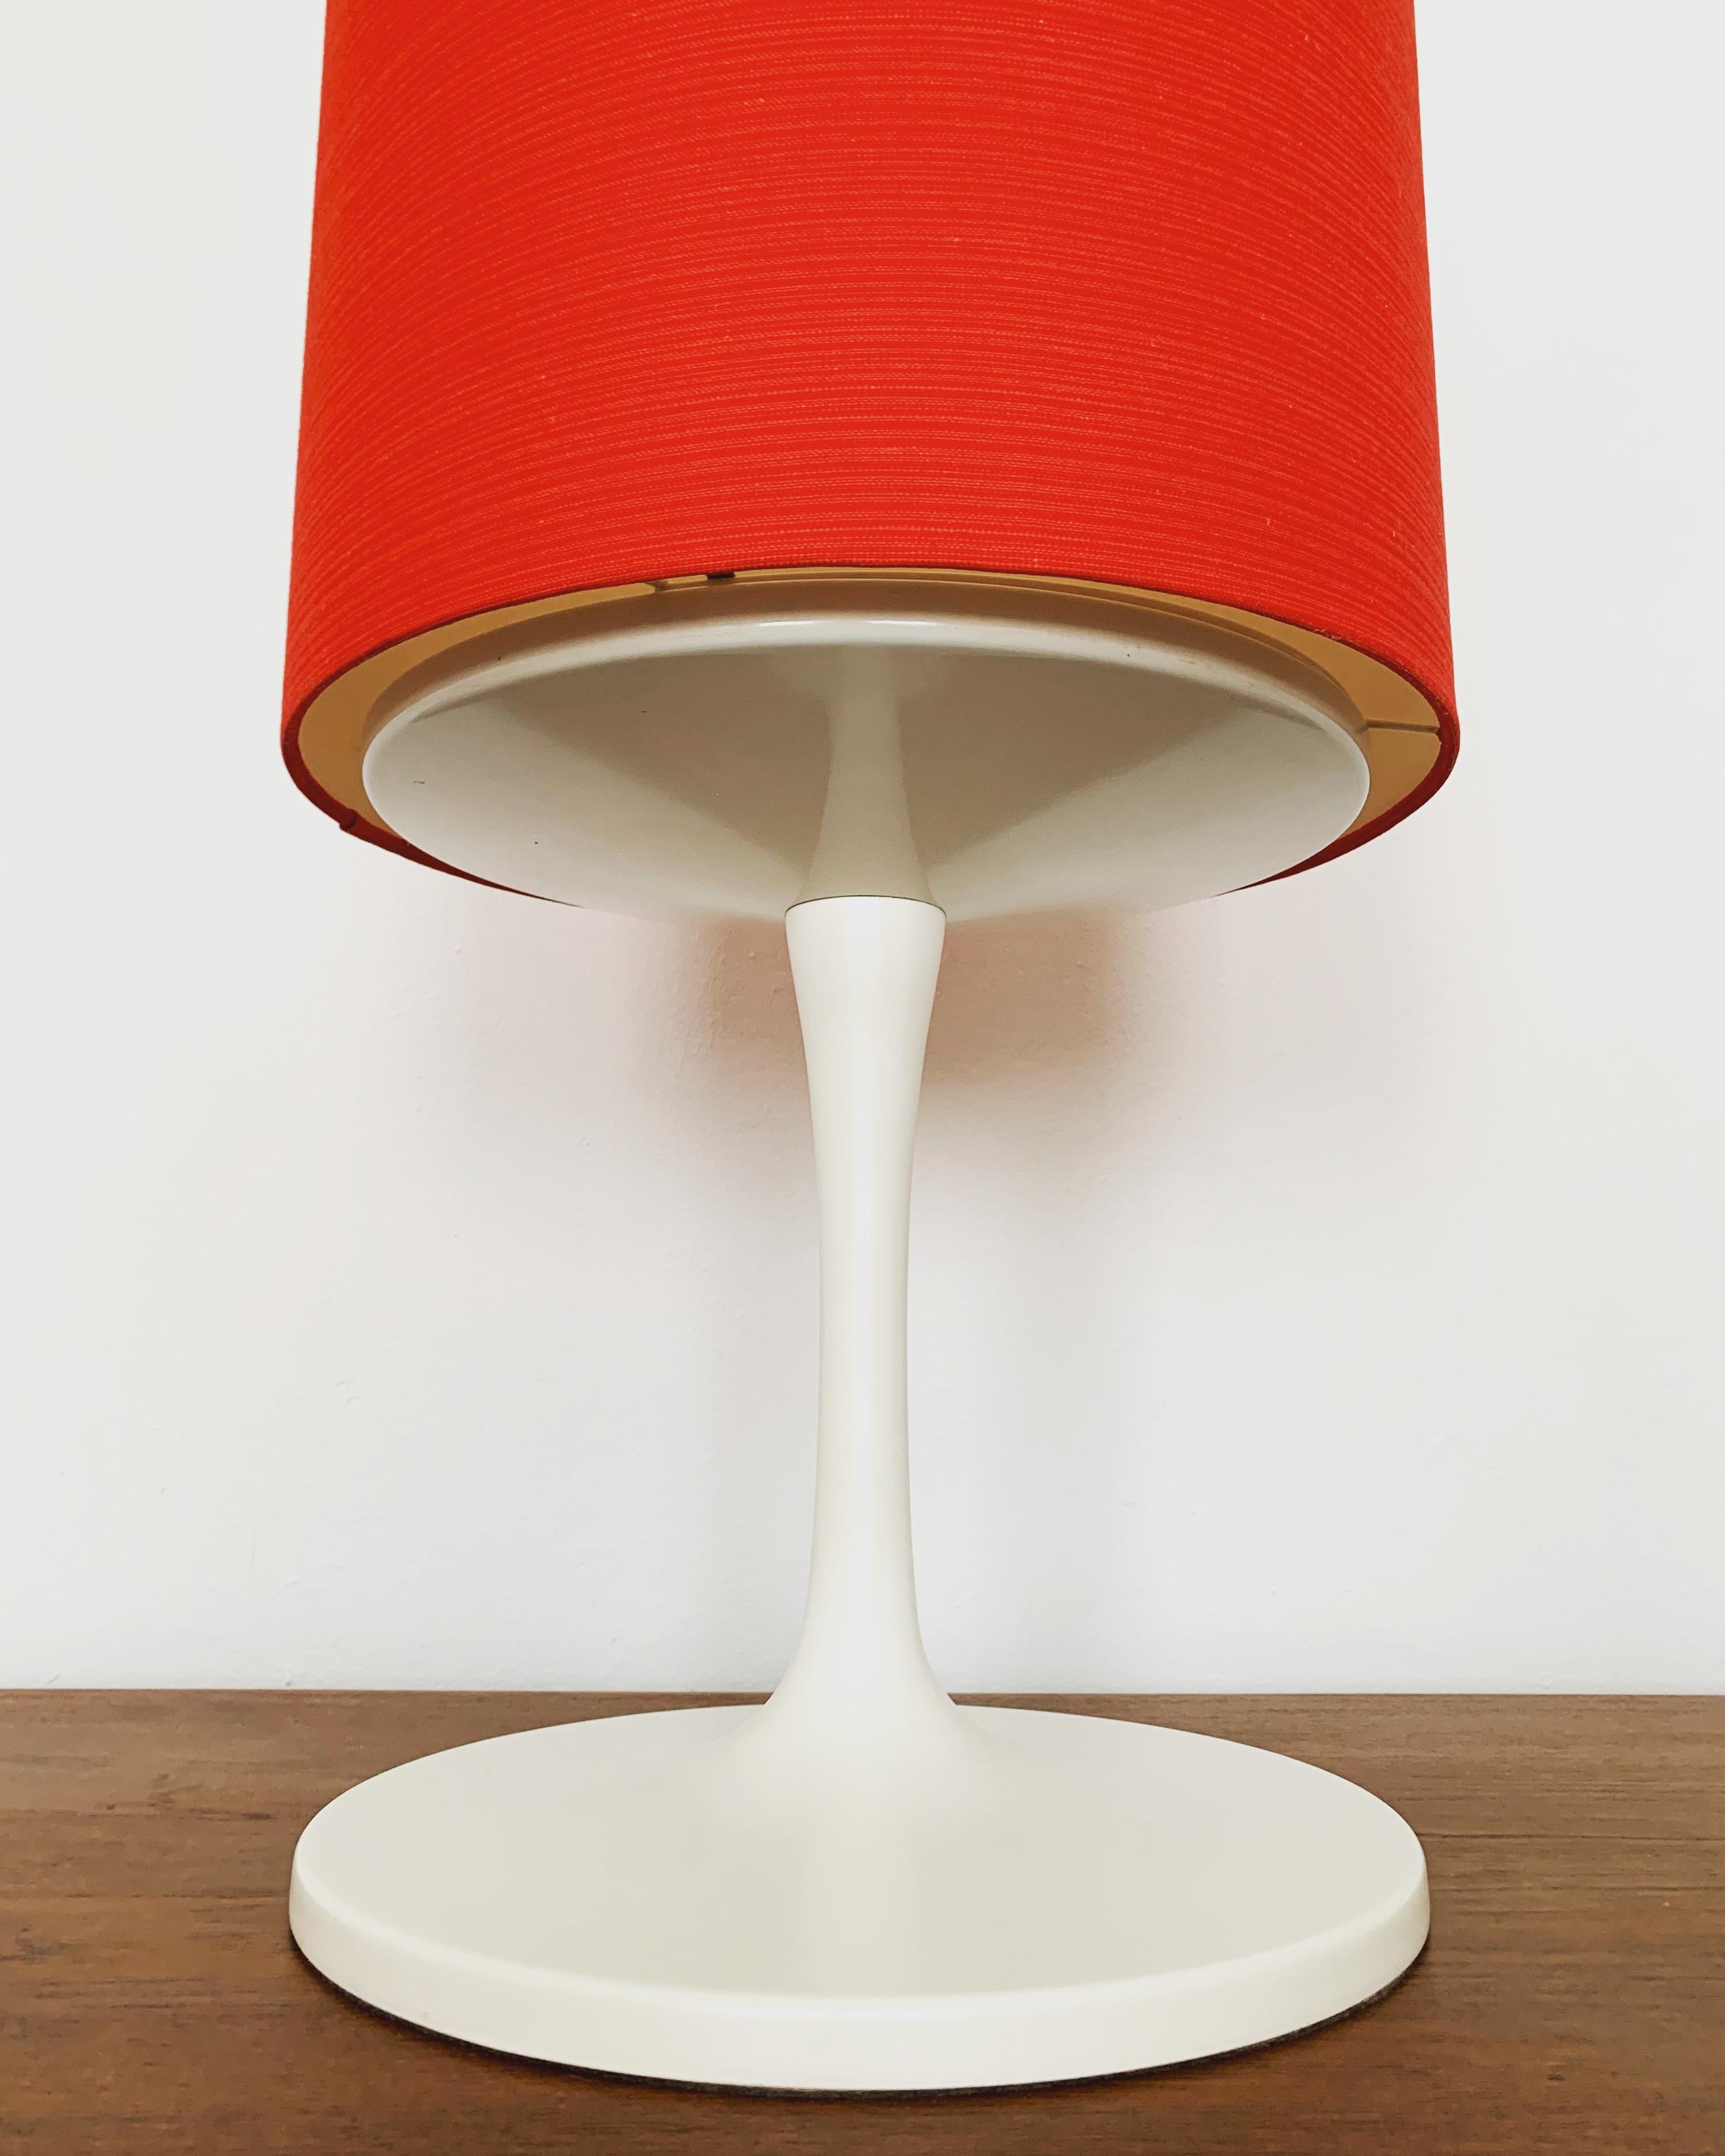 Large 1970s Space Age Table Lamp by Staff In Good Condition For Sale In München, DE